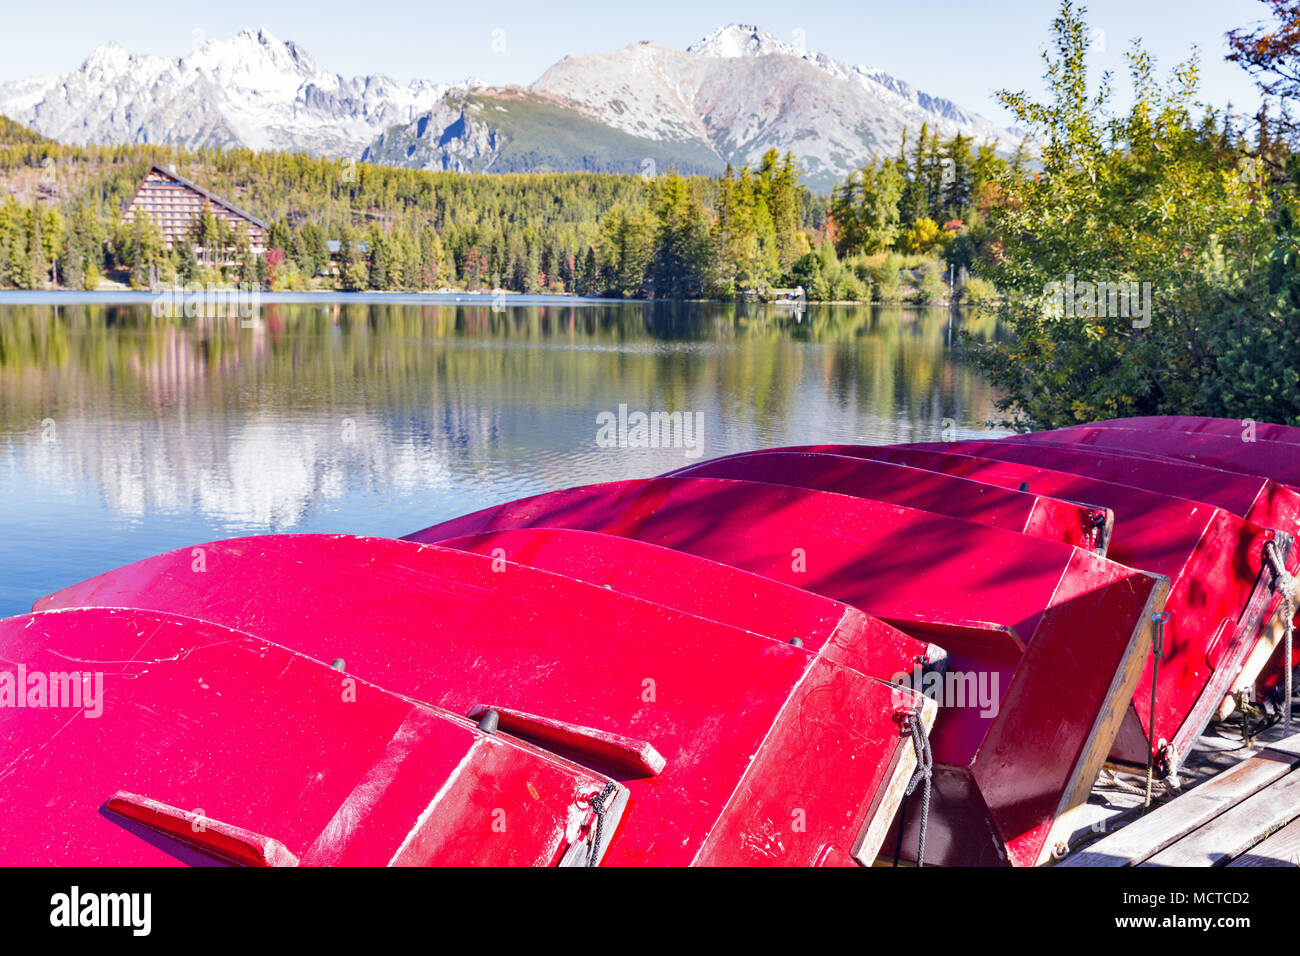 Red flipped over recreational boats on Strbske Lake shore in Slovakia. It is a favorite ski, tourist, and health resort in the High Tatras. Stock Photo